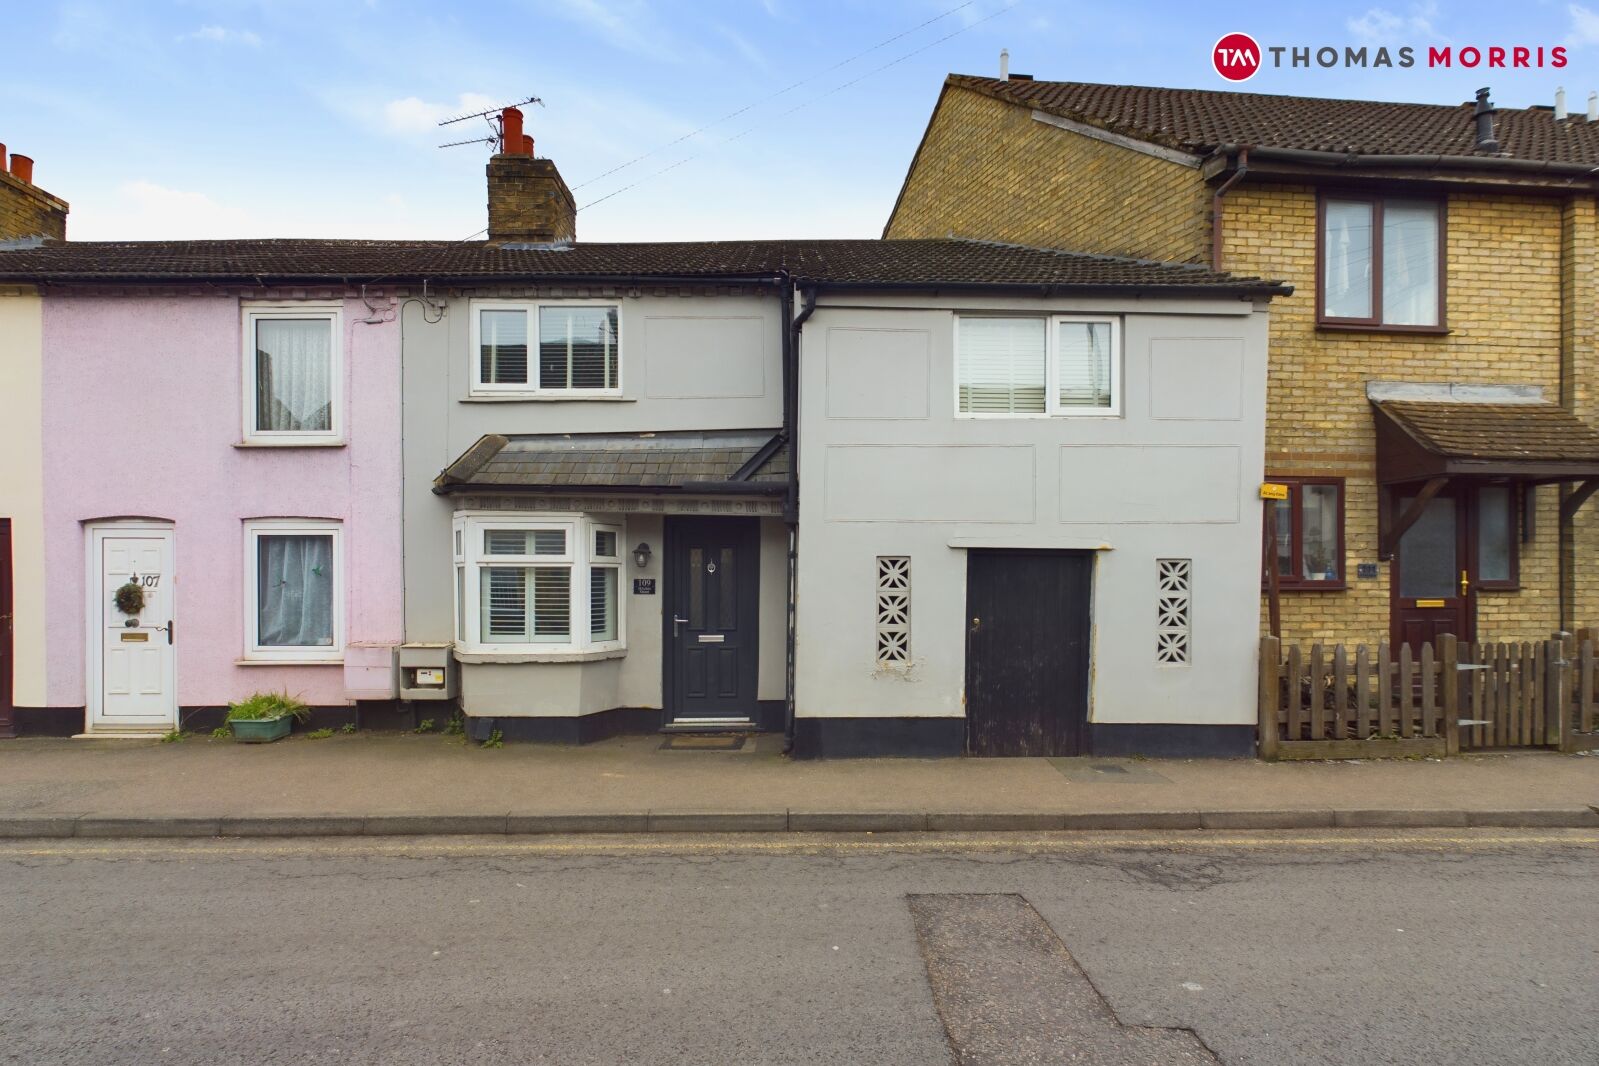 2 bedroom mid terraced house for sale Hitchin Street, Biggleswade, SG18, main image